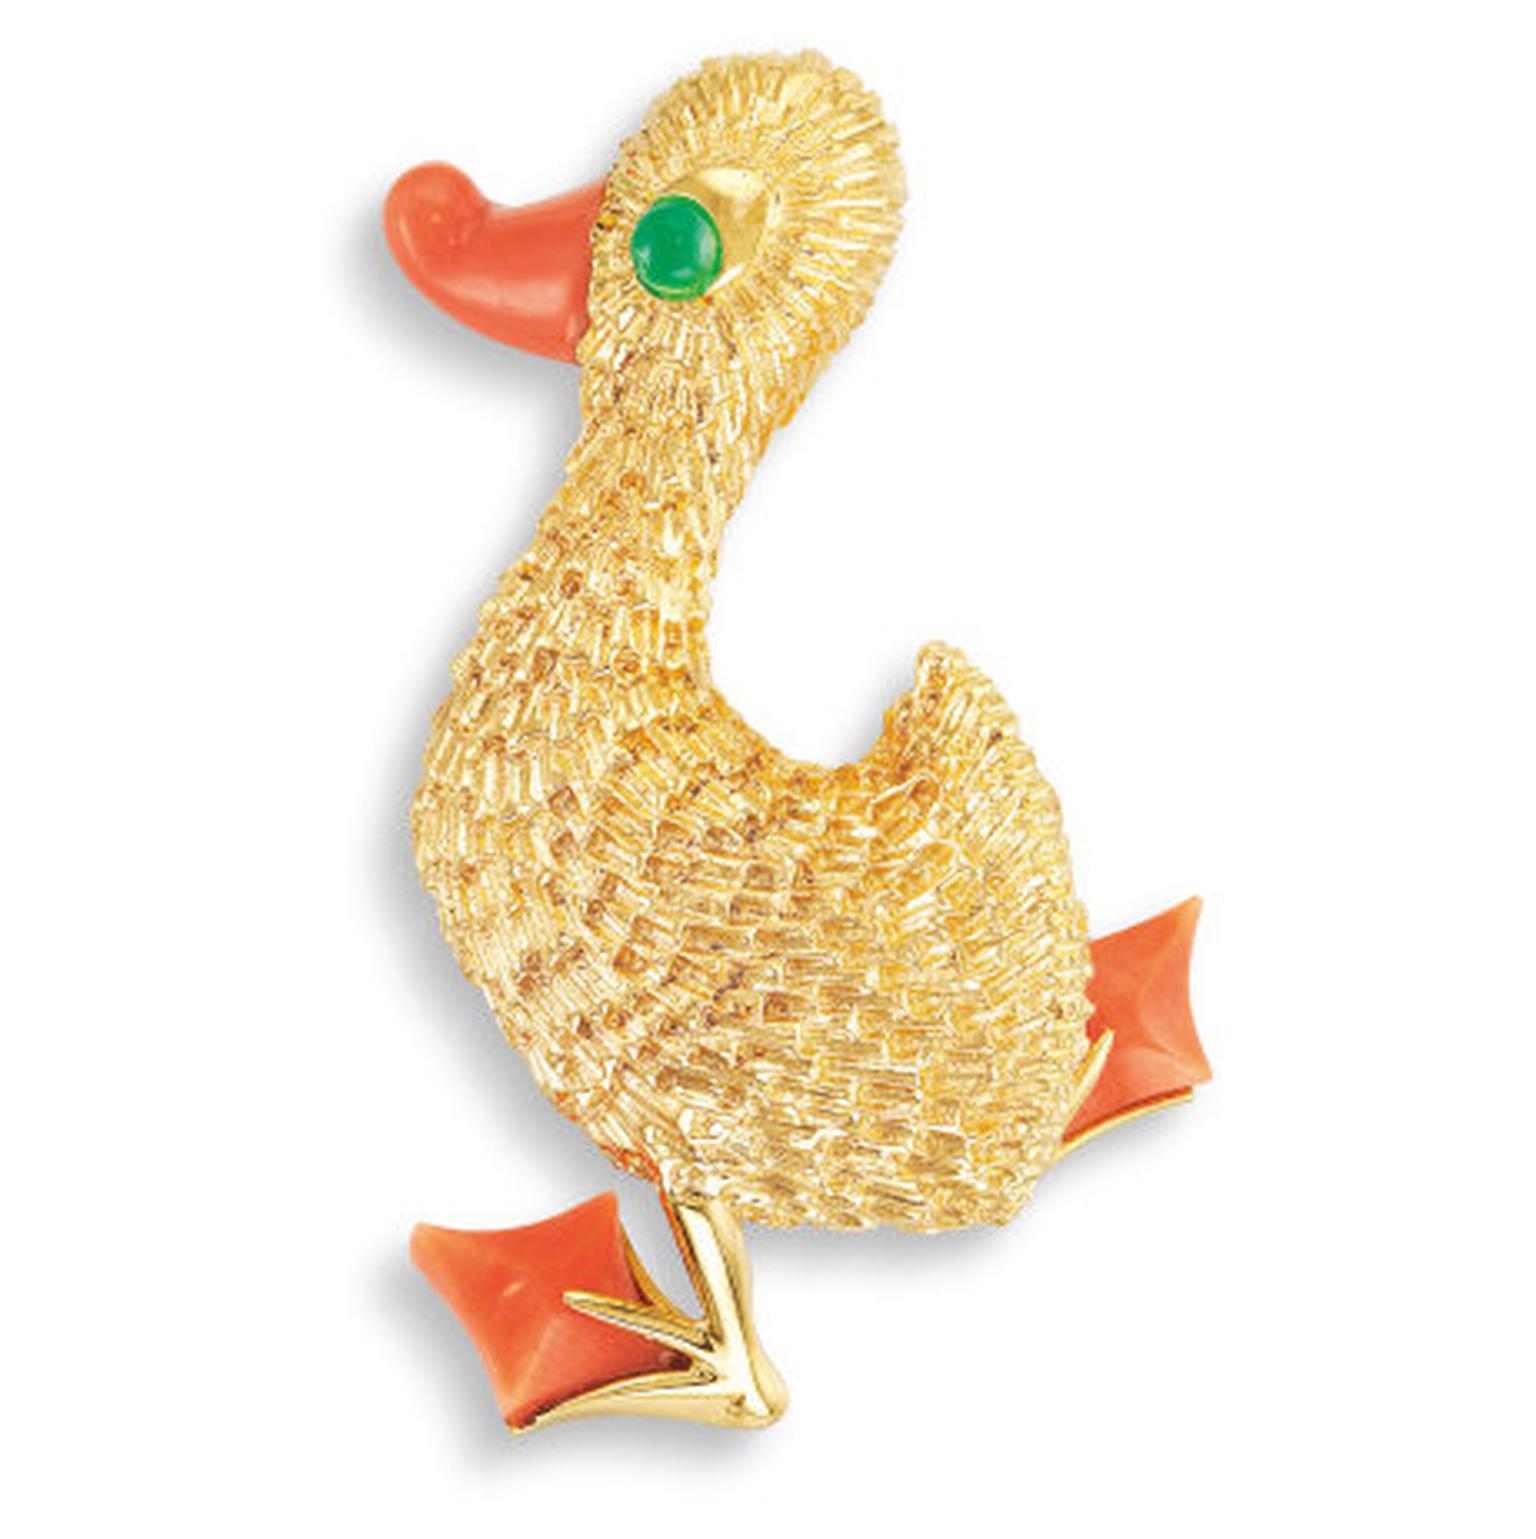 Lot 623: Duck brooch from Van Cleef & Arpels presented at Phillips Live Auction on 8 July 2020.